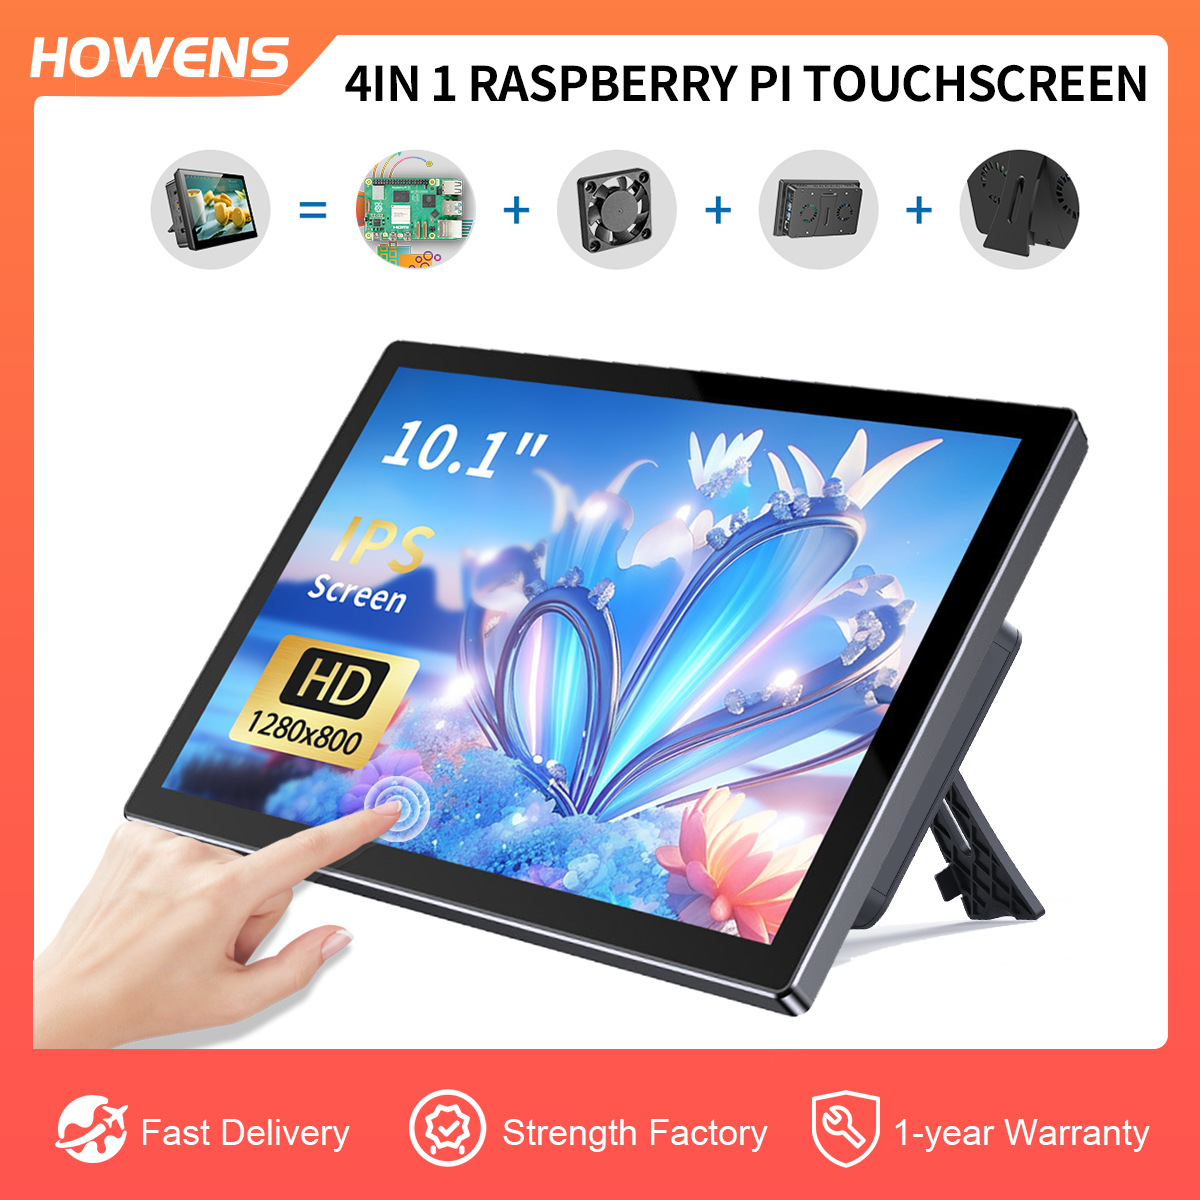 Raspberry Pi Monitor/Industrial Monitor/10.1 Inch HD Touchscreen/1280x800P/Support for HDMI,Type-C Display&USB Touch